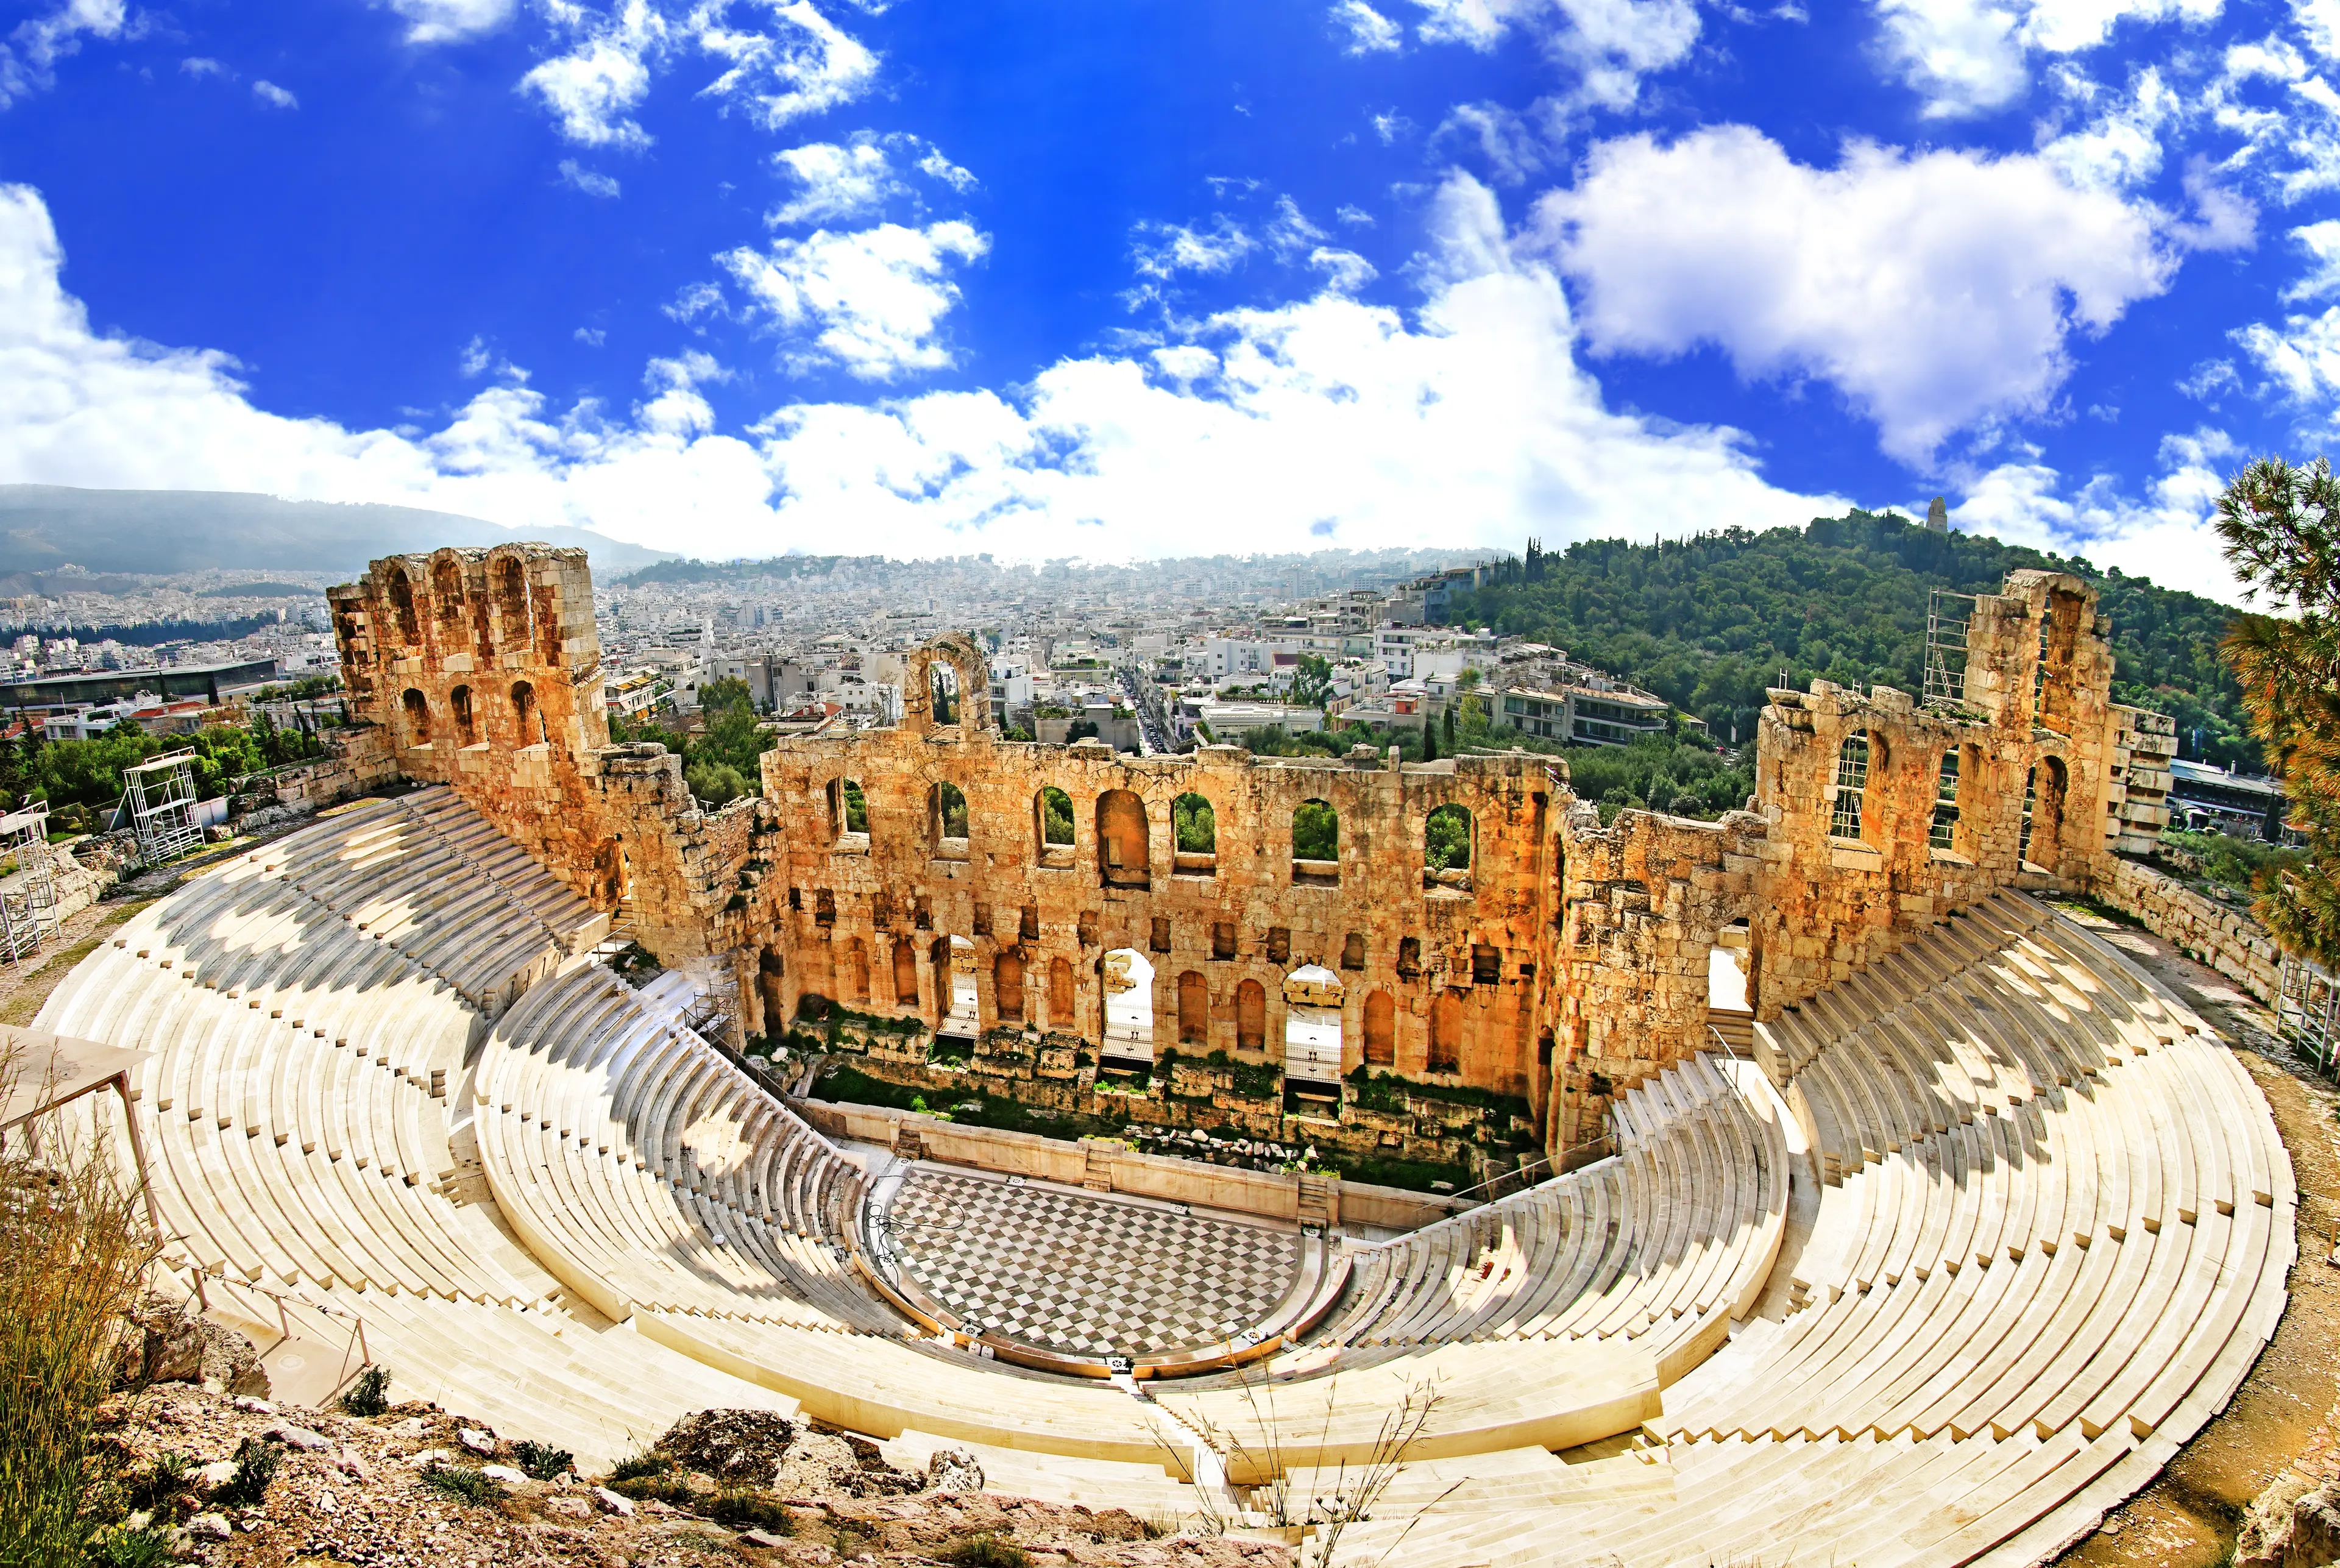 Ancient theater in Acropolis